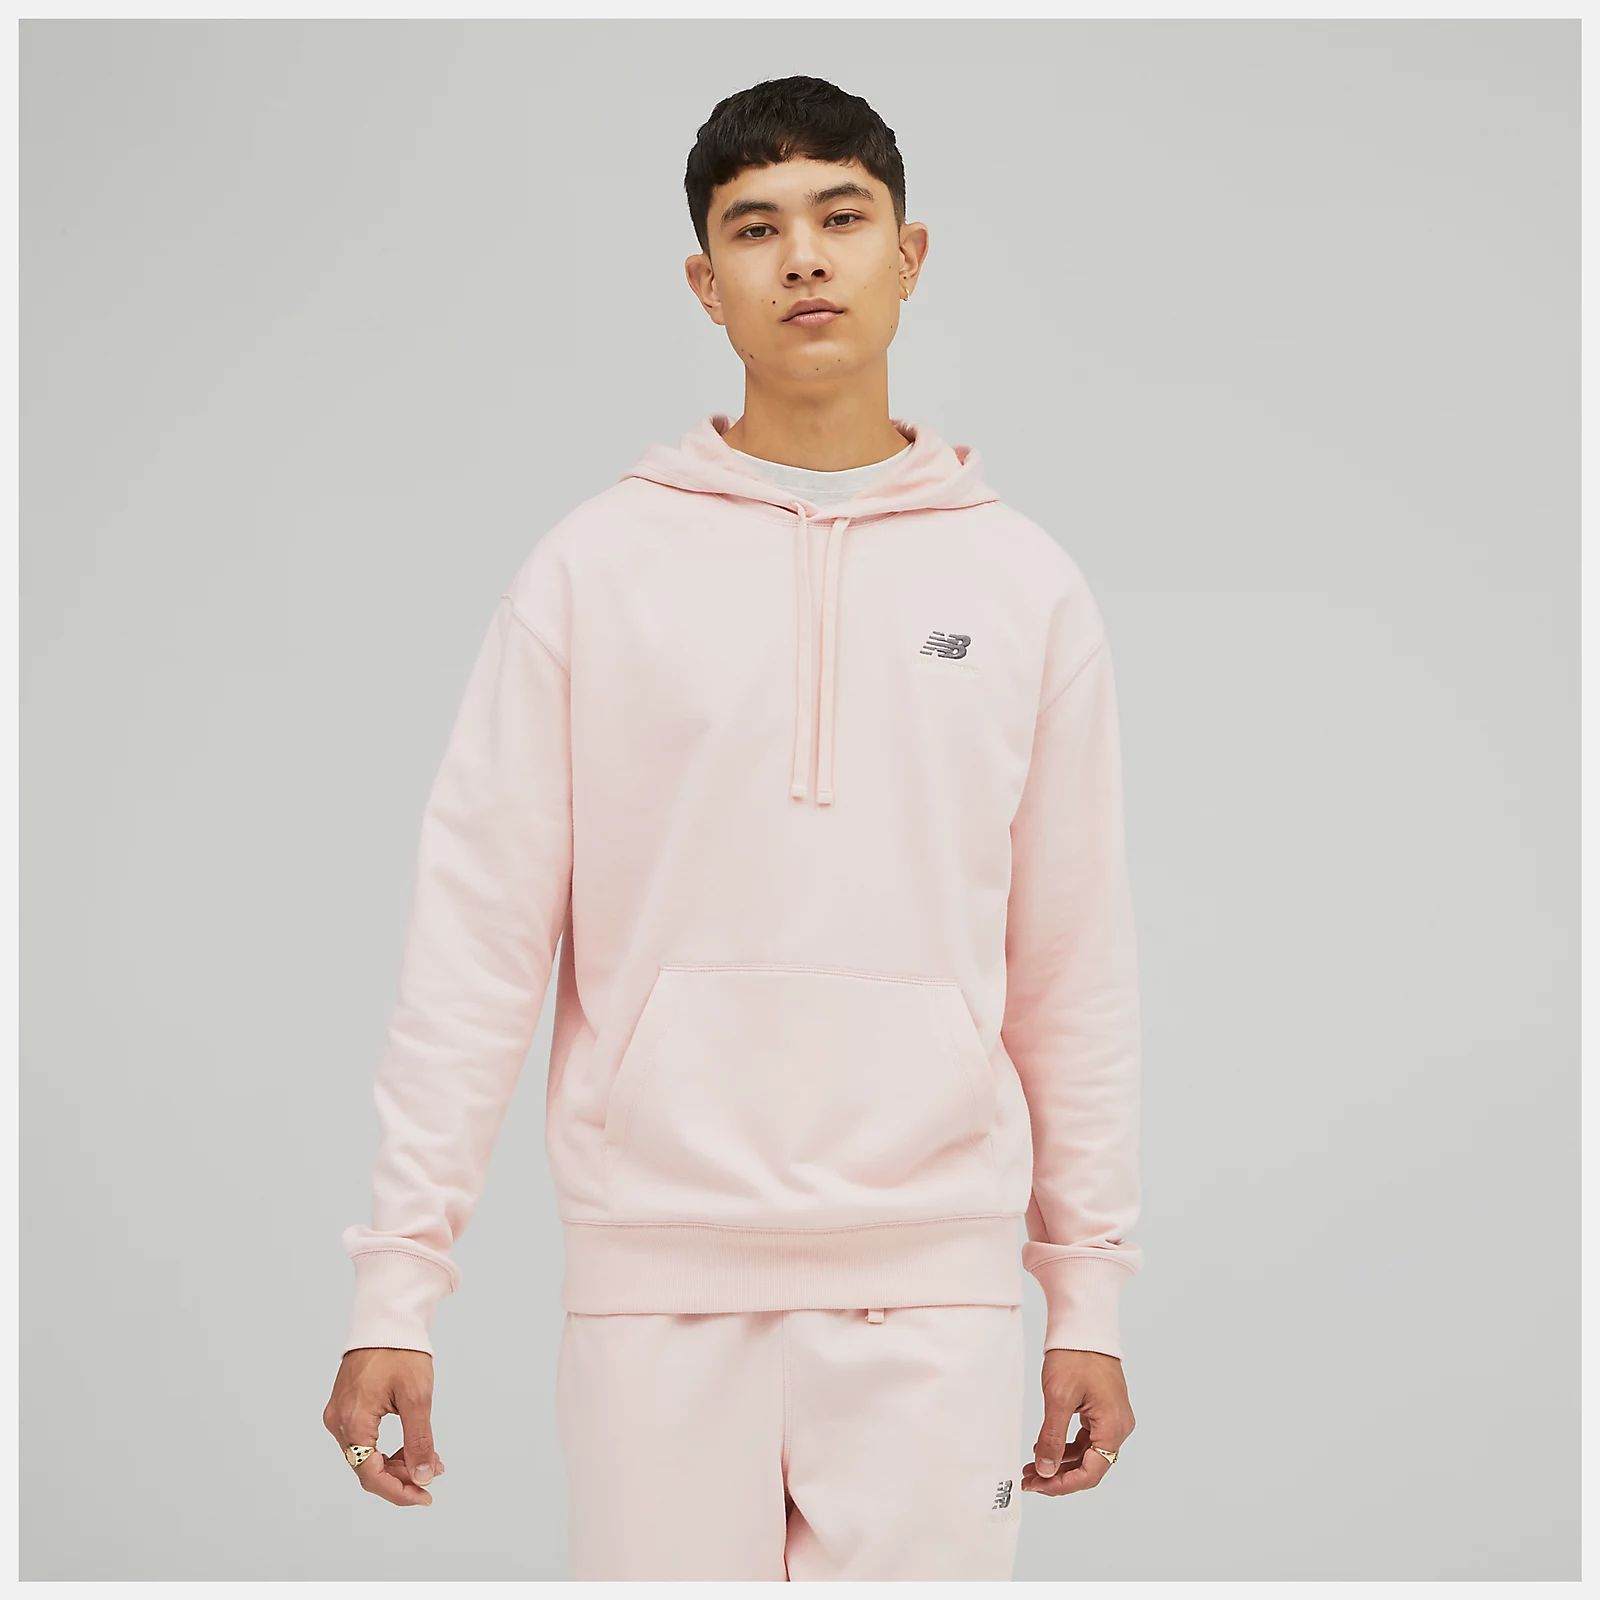 Uni-ssentials French Terry Hoodie | New Balance Athletics, Inc.